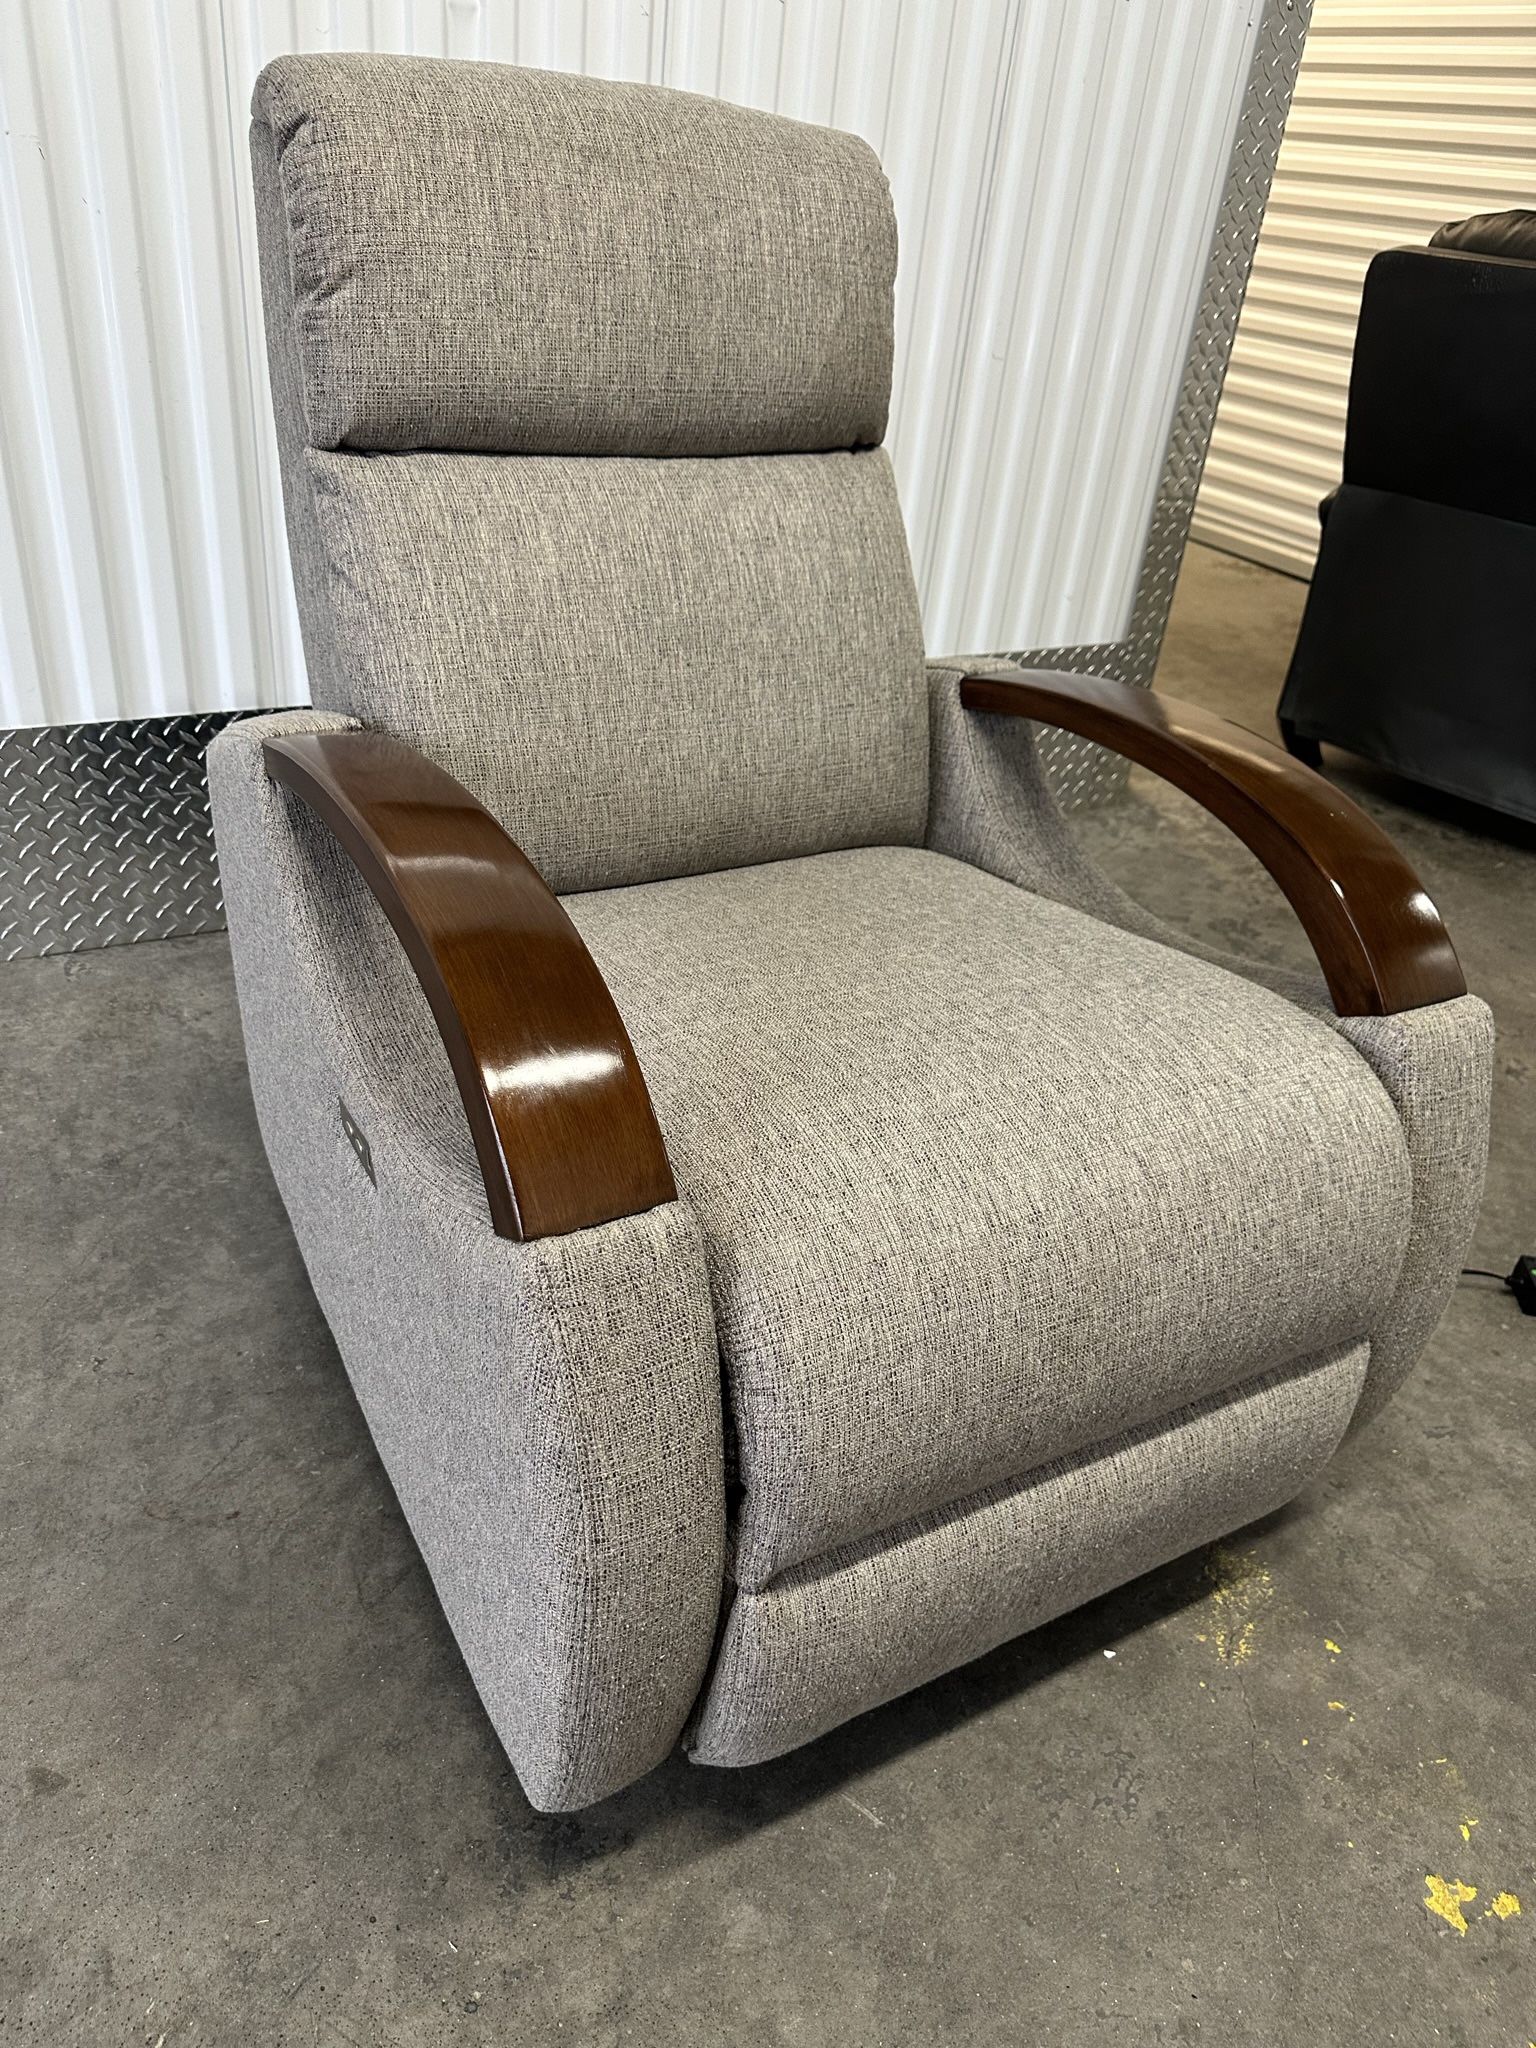 NEW SYNERGY FABRIC POWER RECLINER   Retails for over $500 Previous floor model for a month (excellent condition)  Foam seat cushion • Sinuous spring s